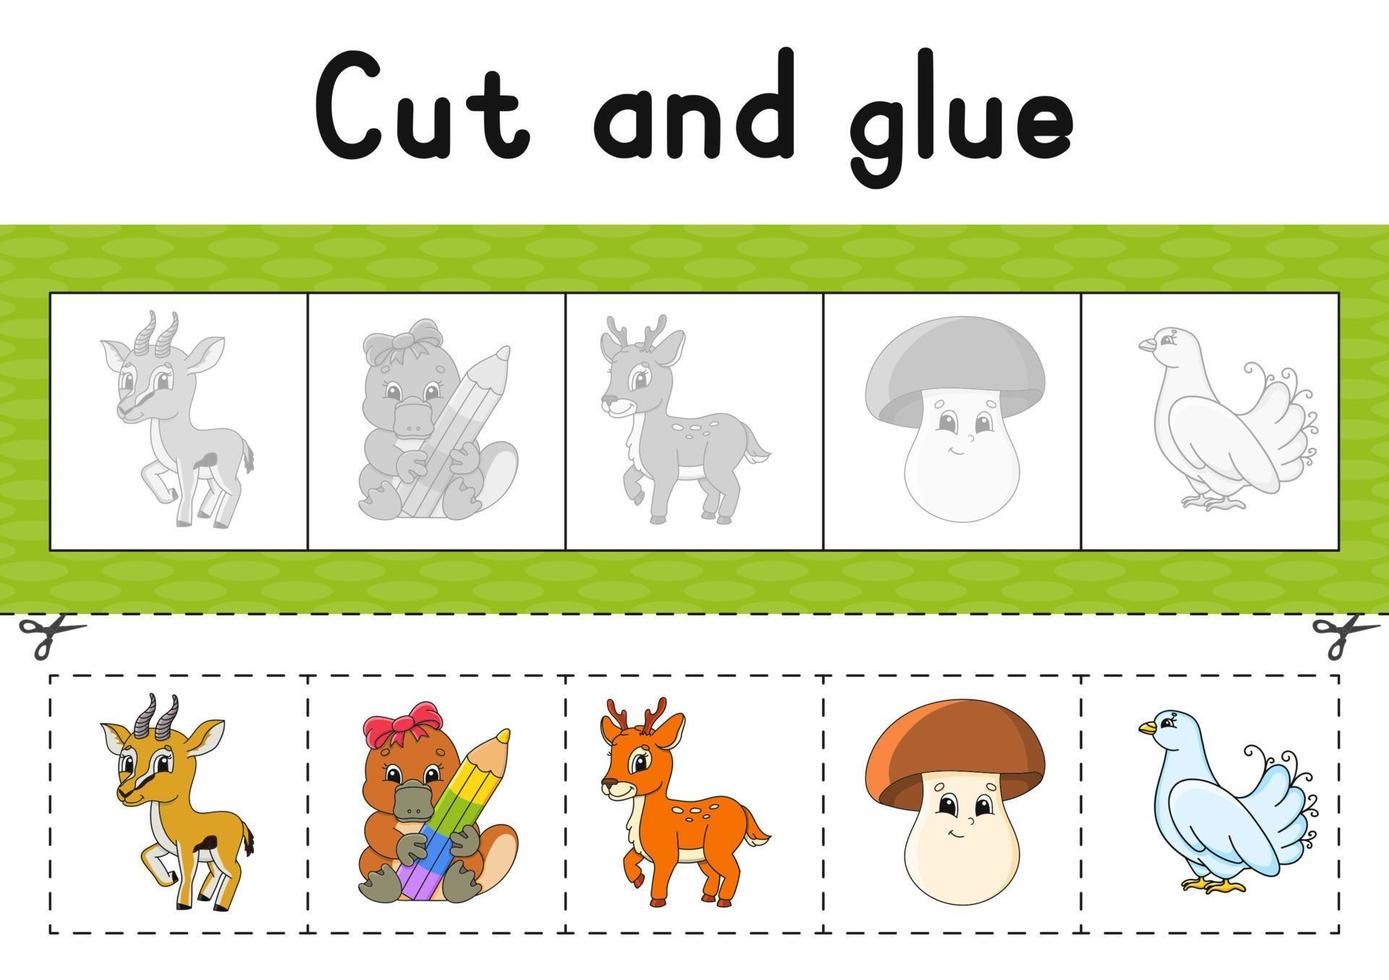 Cut and glue. Color activity worksheet for kids. Game for children. Cartoon character. Vector illustration.